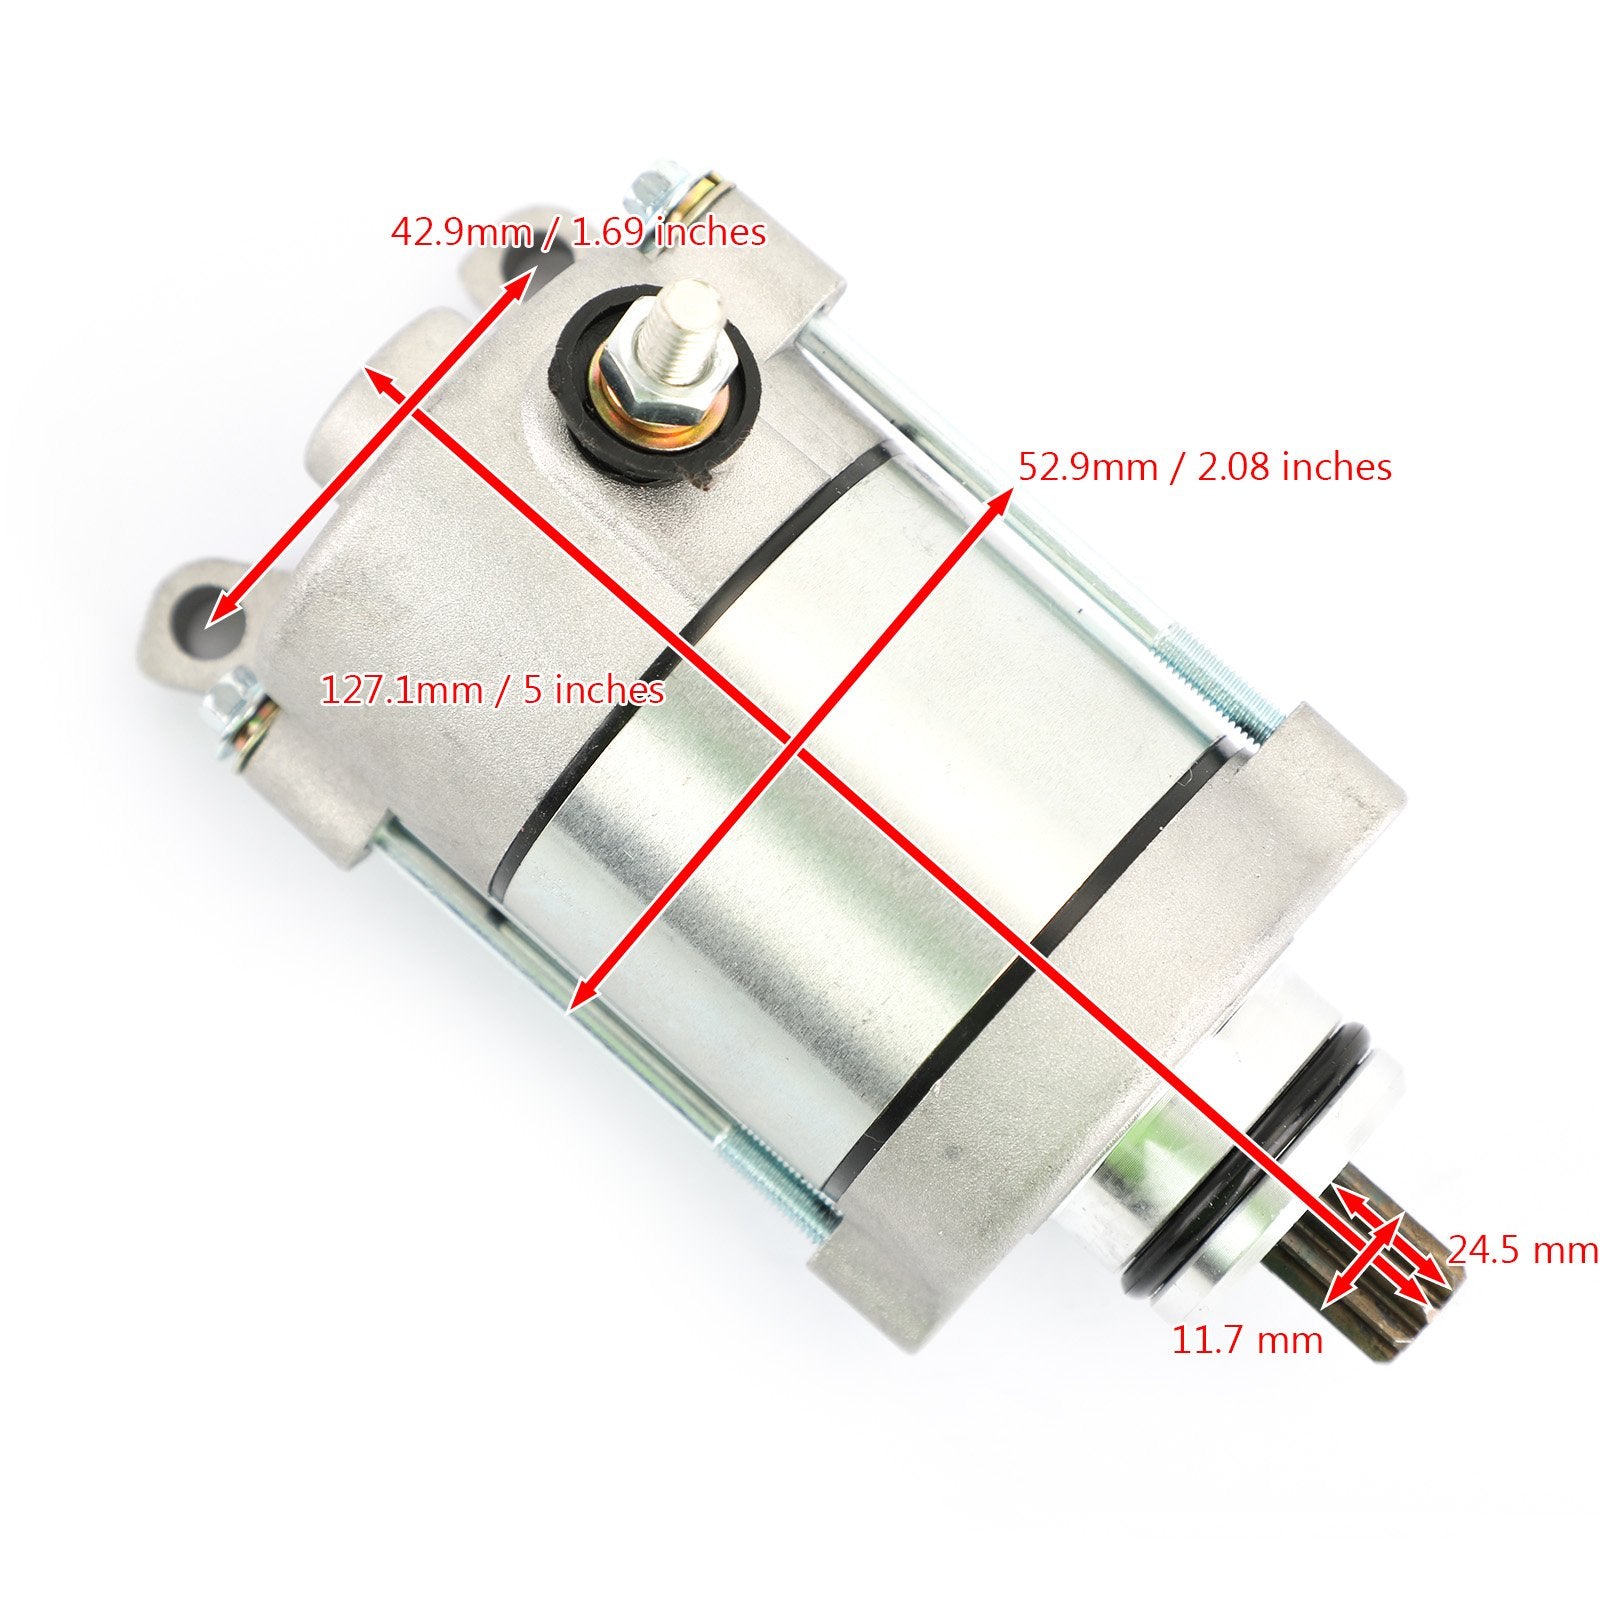 STARTER MOTOR Fit for Honda CRF450X 2005-2018 449cc Off-Road 31200-MEY-671 Generic